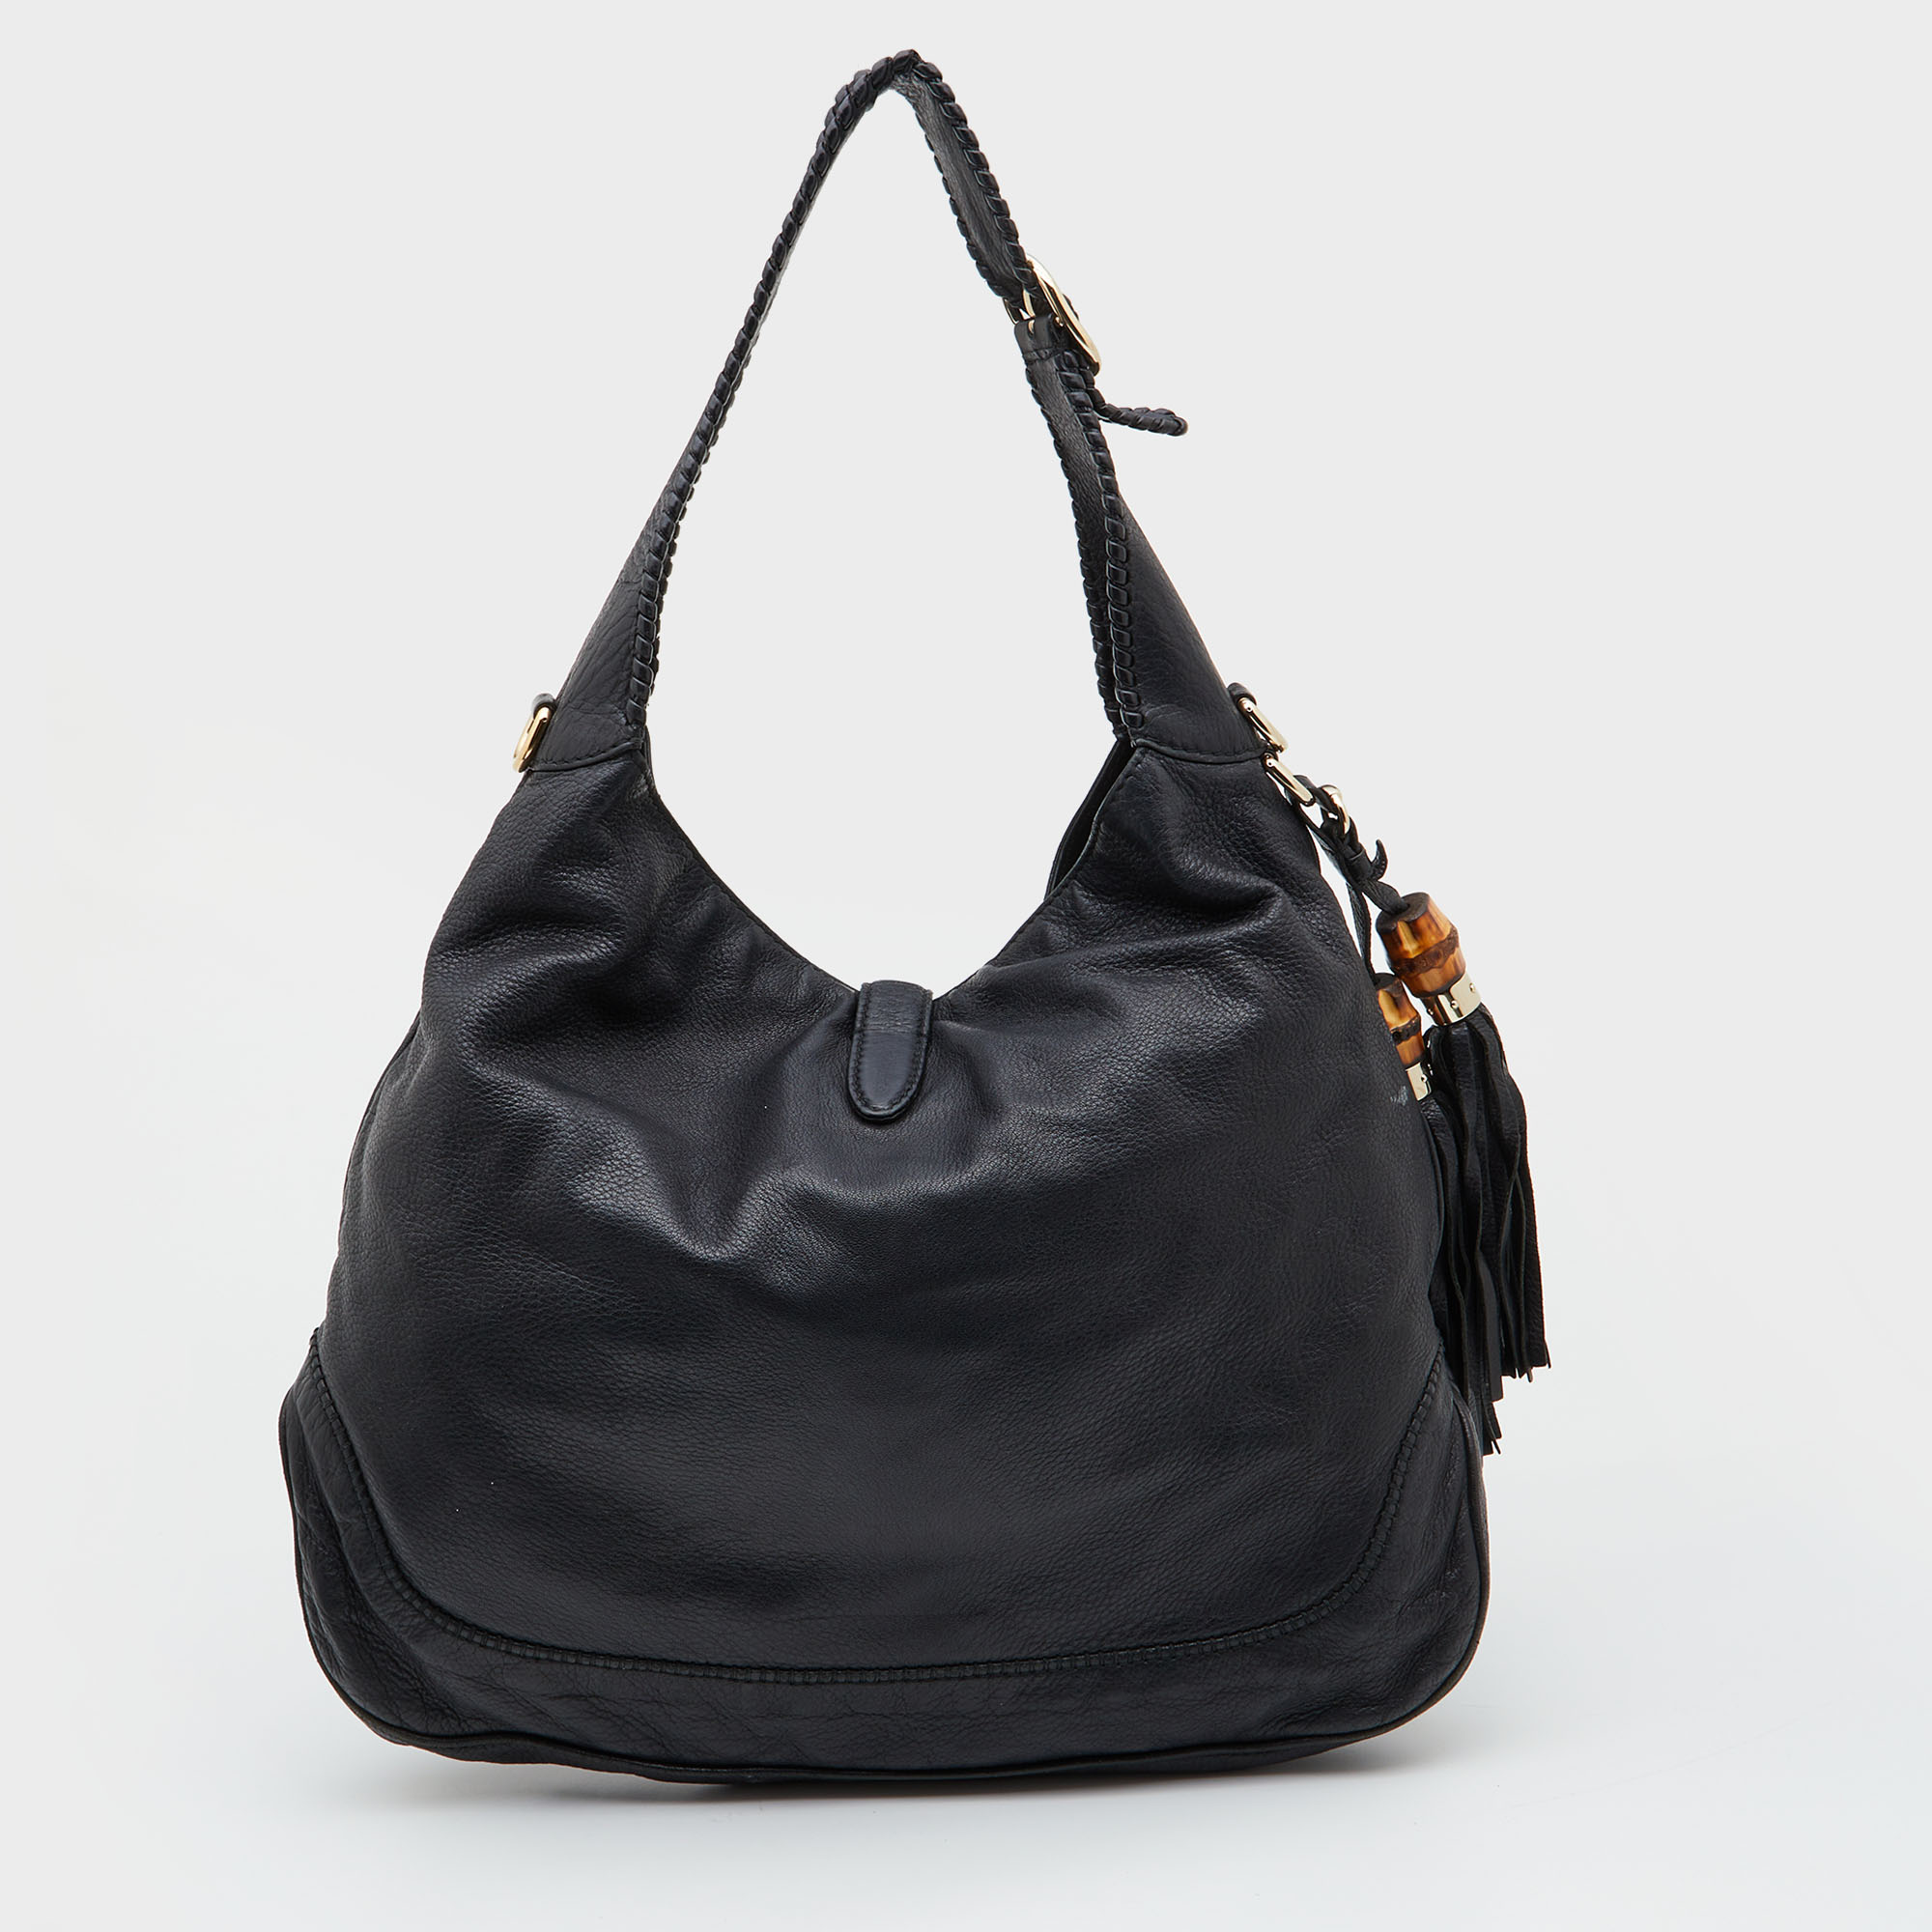 Gucci Black Leather New Jackie Hobo